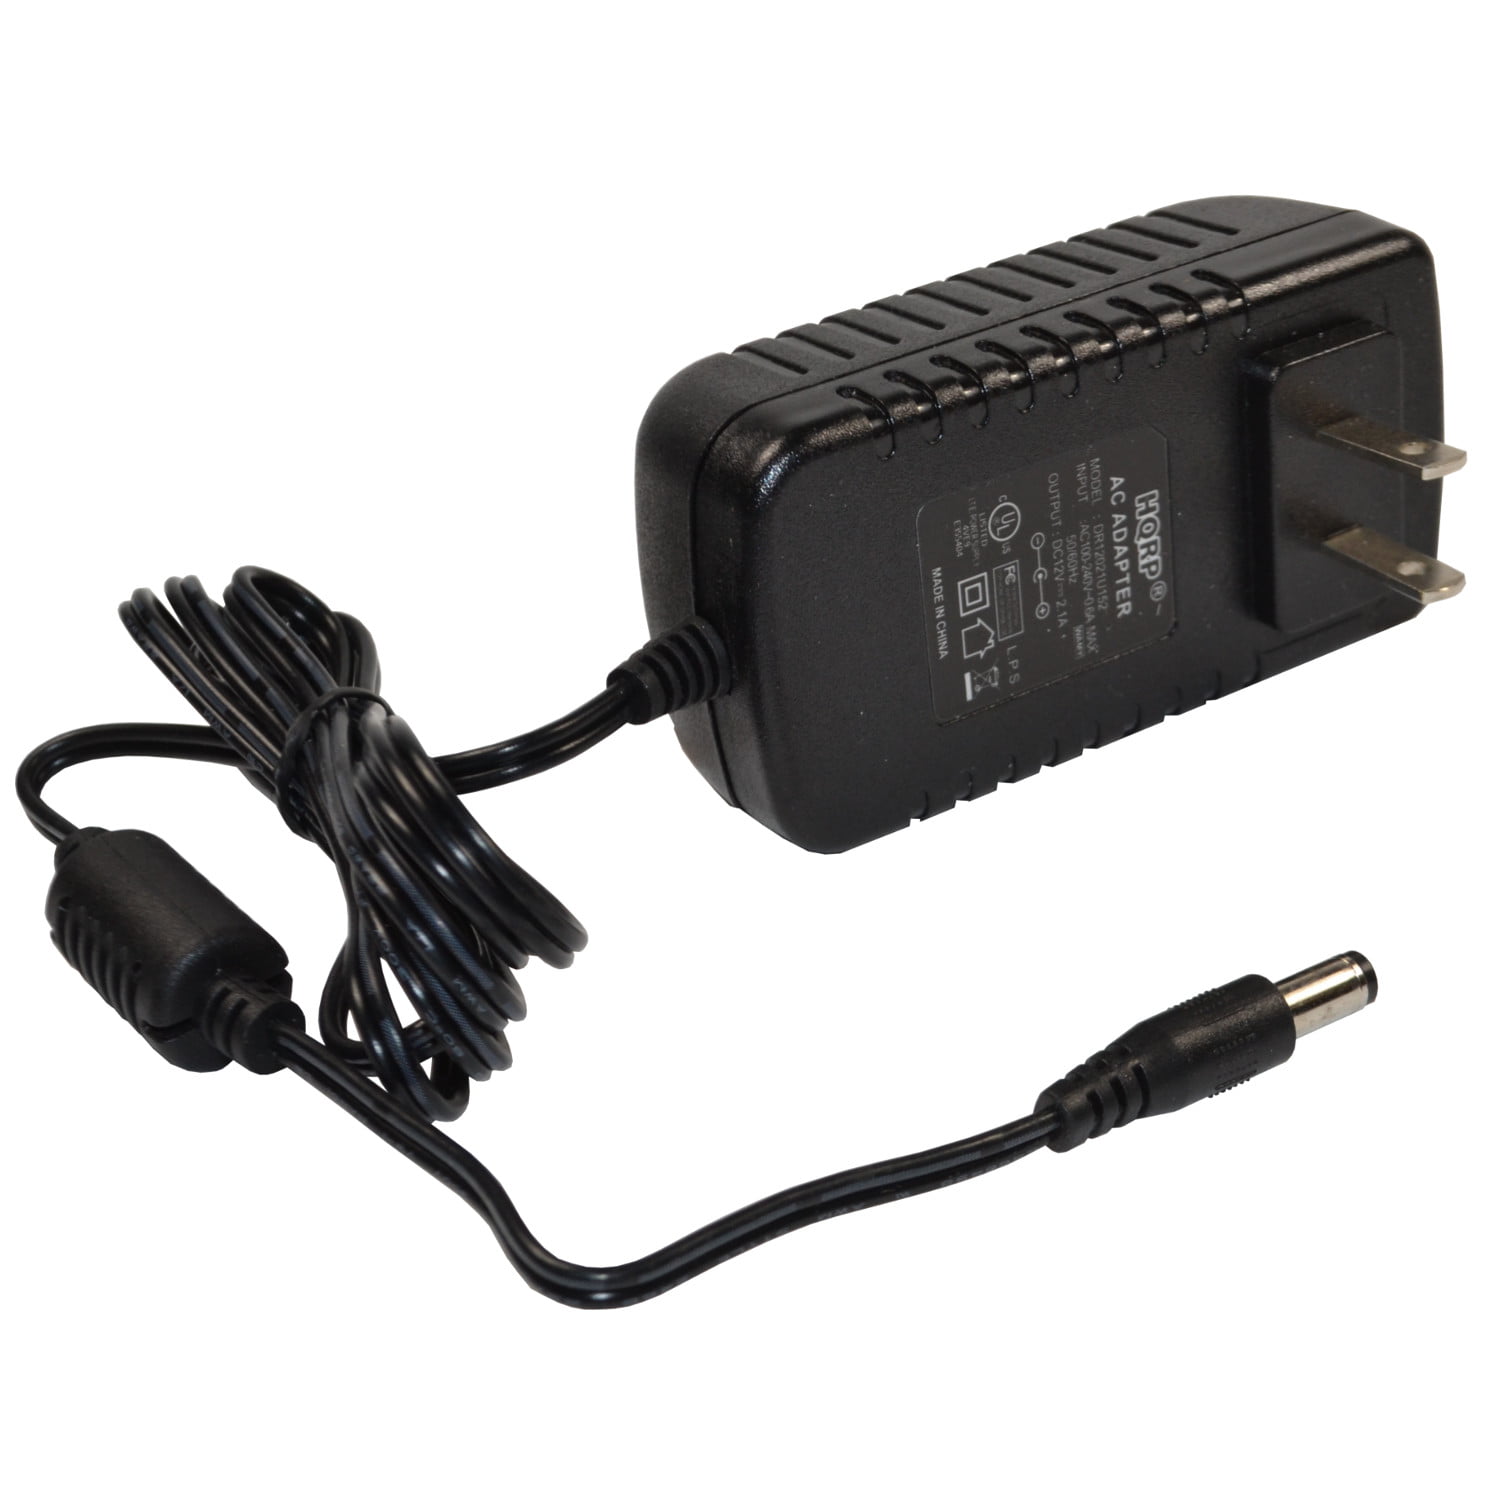 100-240 VAC 50/60Hz Worldwide Voltage Use Mains PSU PK Power AC/DC Adapter for WD My Cloud EX4 Western Digital Personal Cloud Storage Power Supply Cord Cable PS Charger Input 